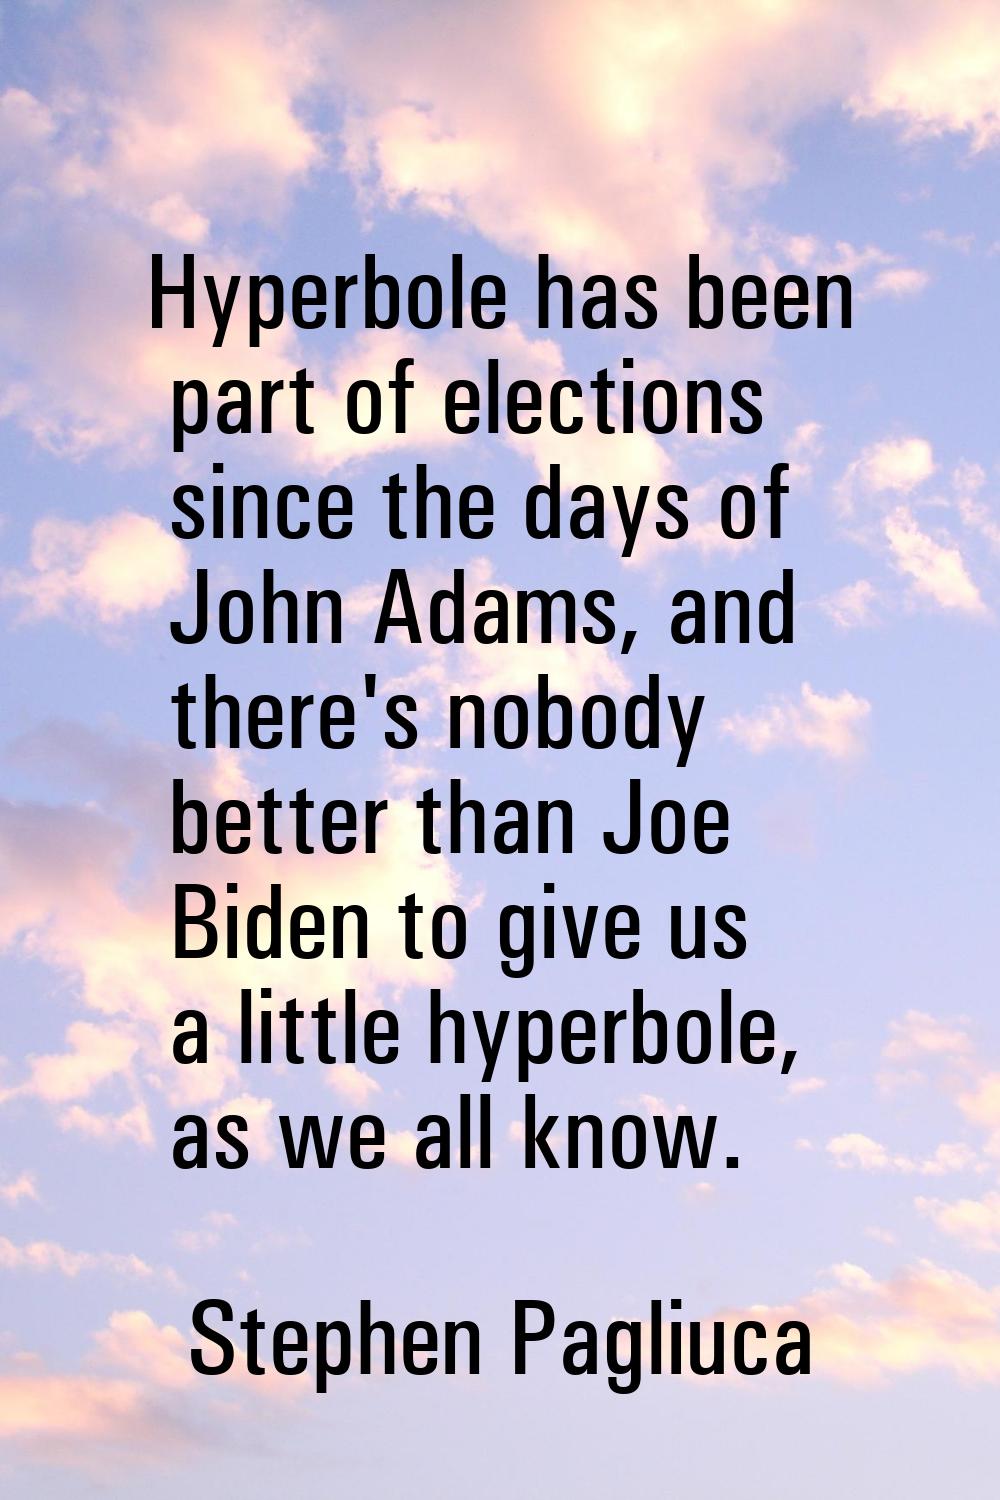 Hyperbole has been part of elections since the days of John Adams, and there's nobody better than J